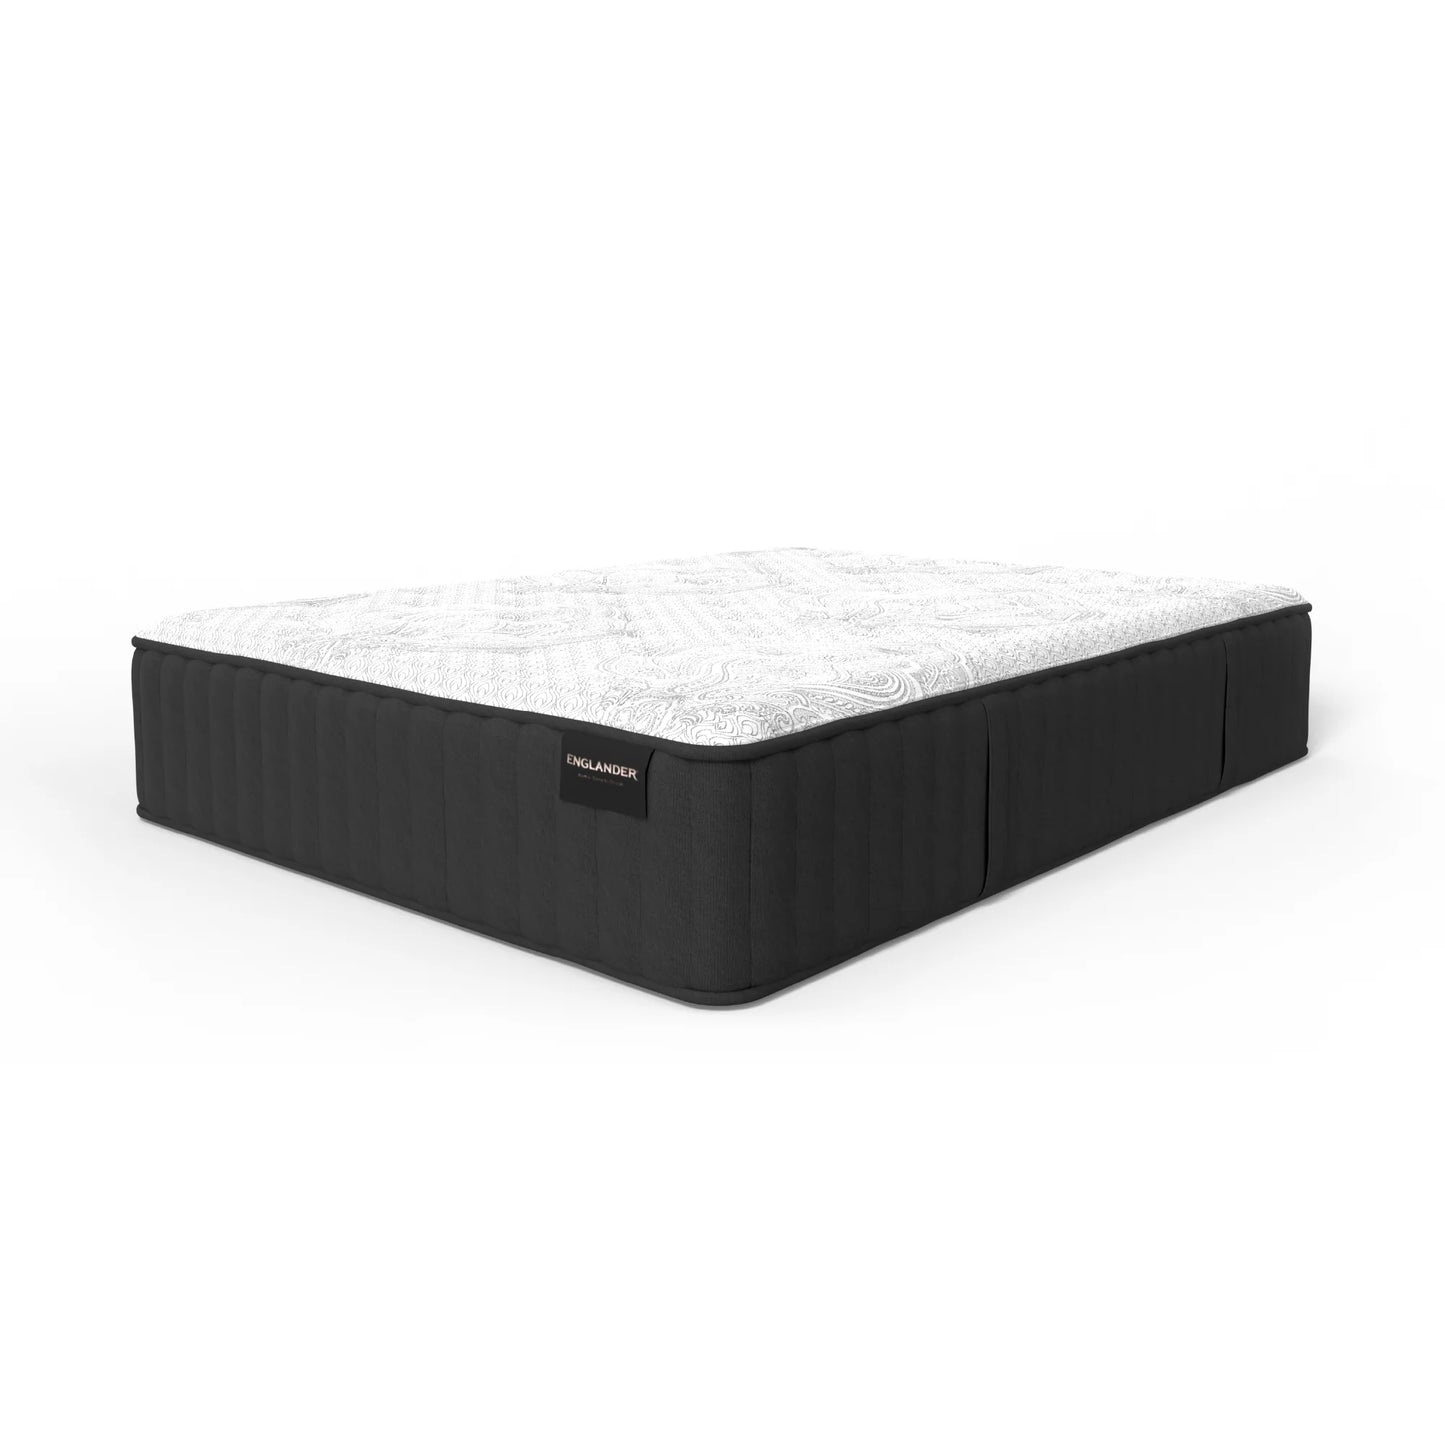 Englander The Supreme Collection Beckford Luxury Firm 14.5" Mattress